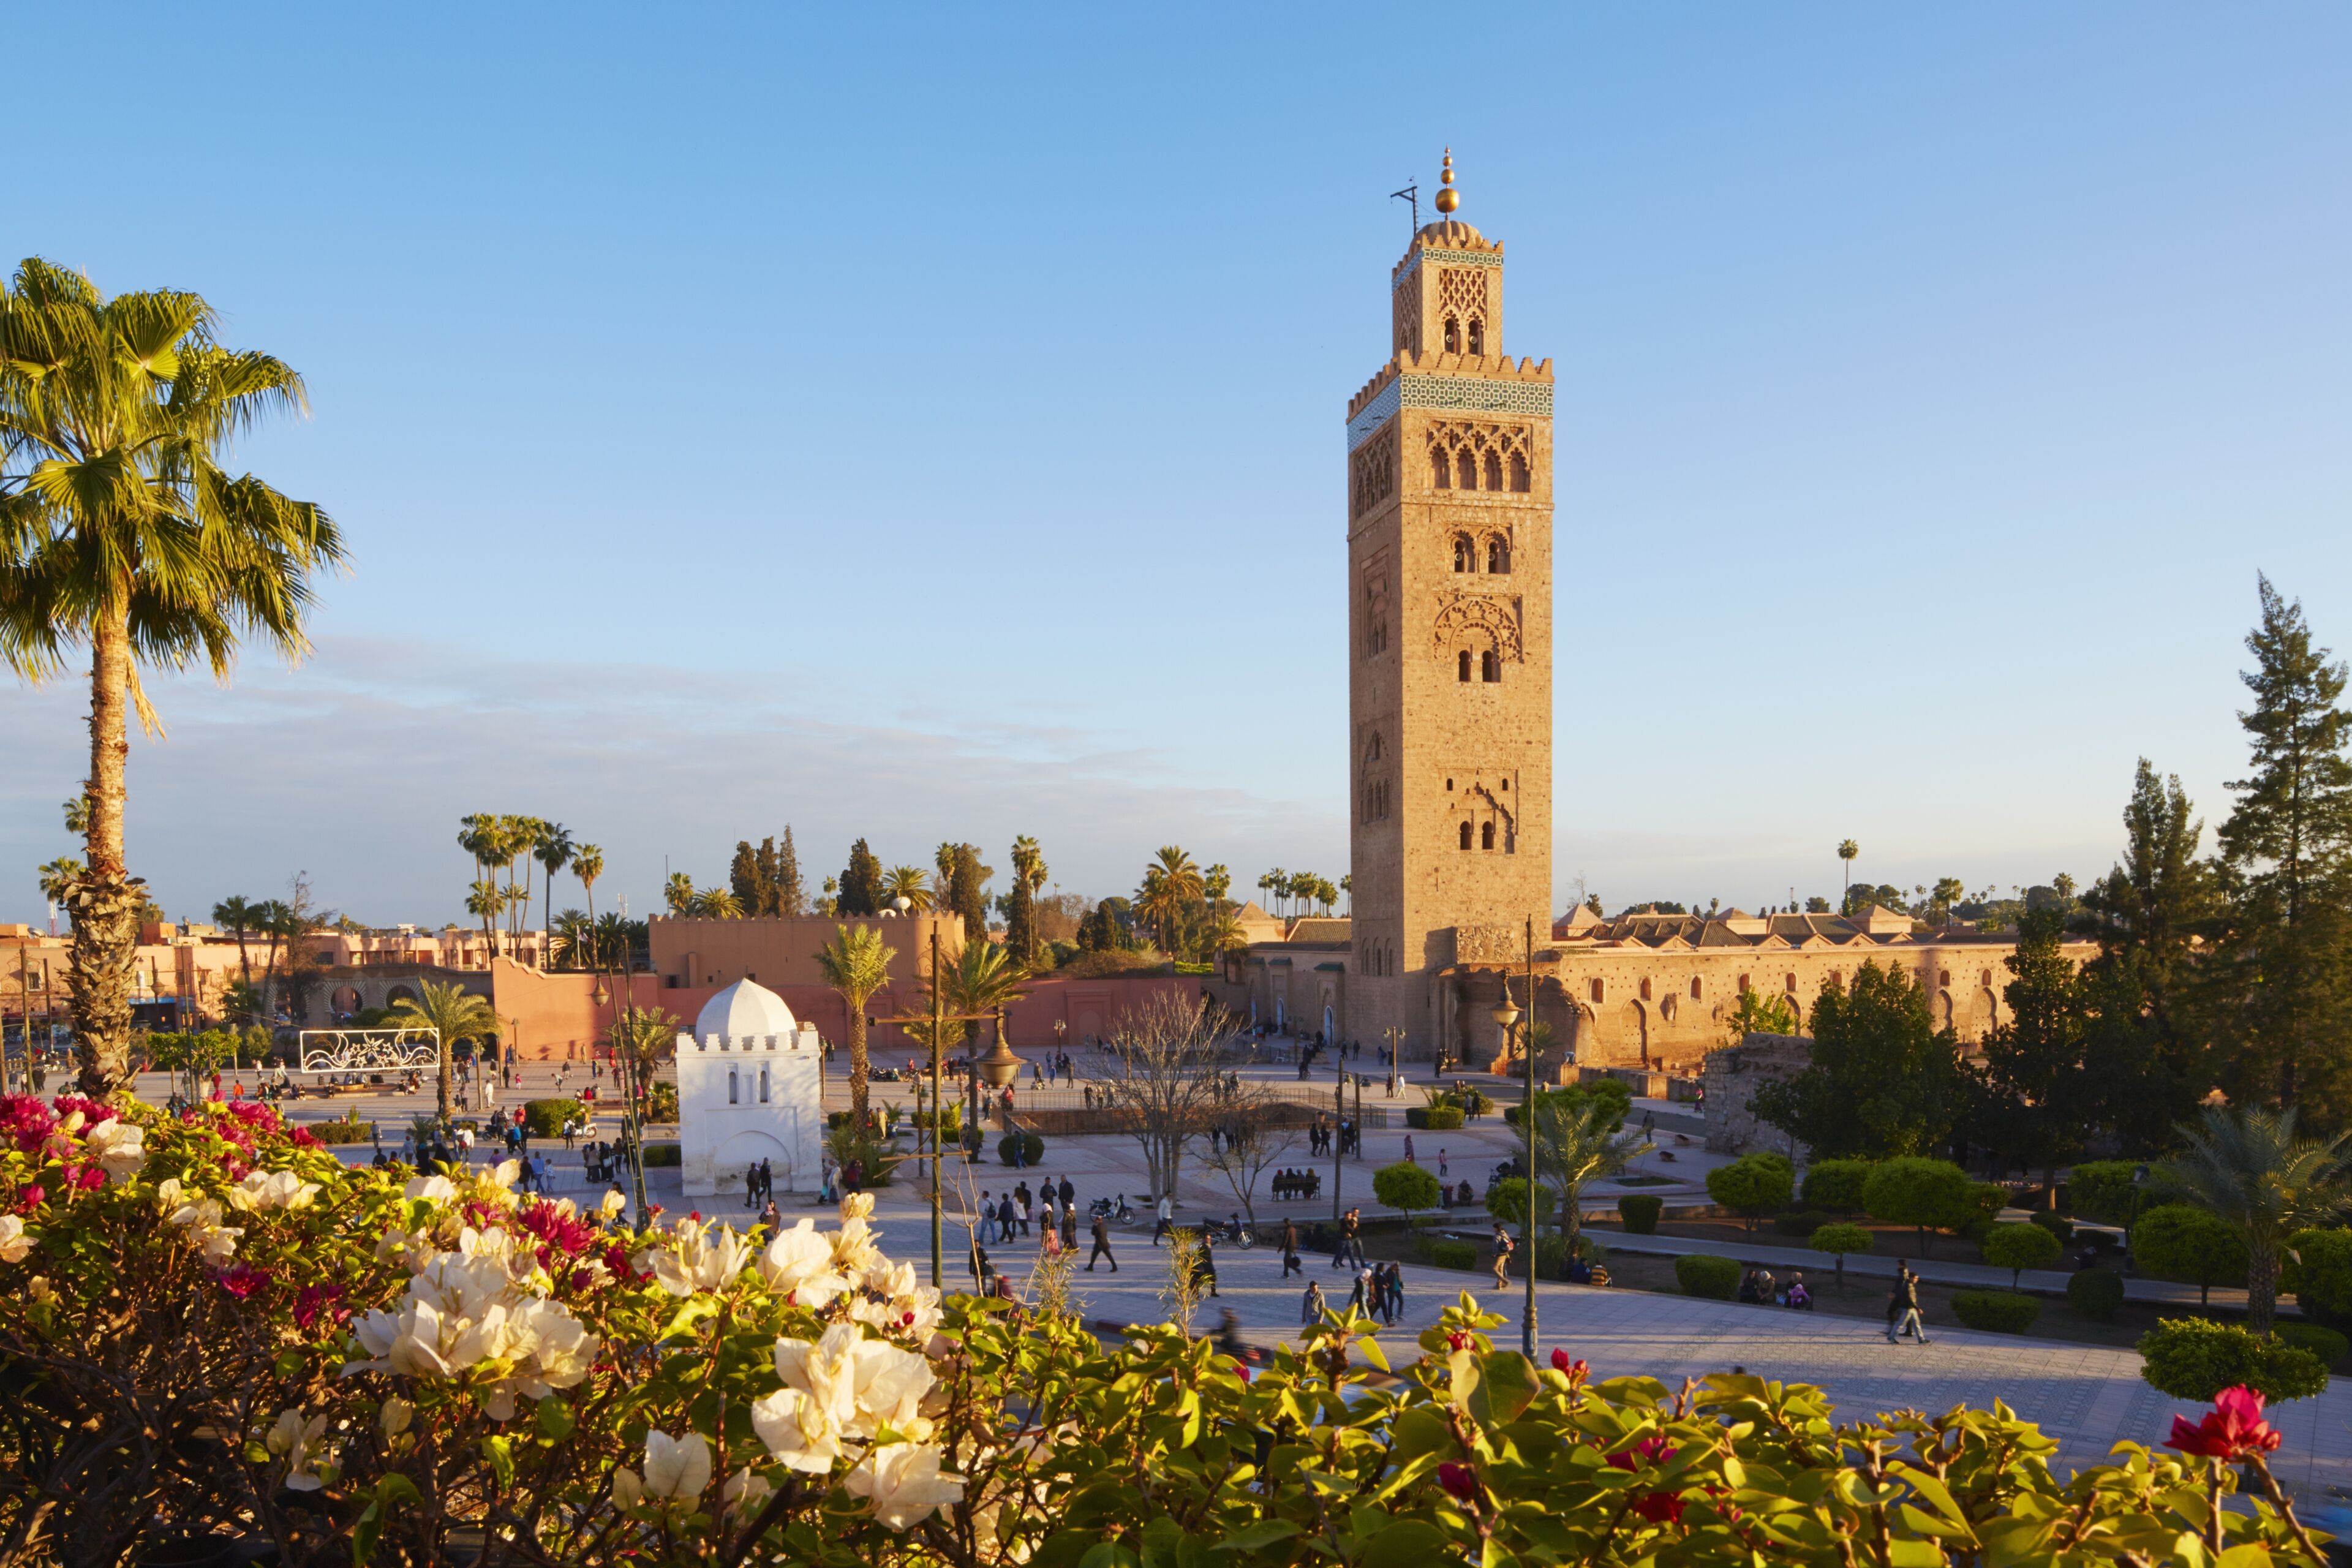 A towering minaret rises above a lively square surrounded by gardens and palms, under the soft light of late afternoon.